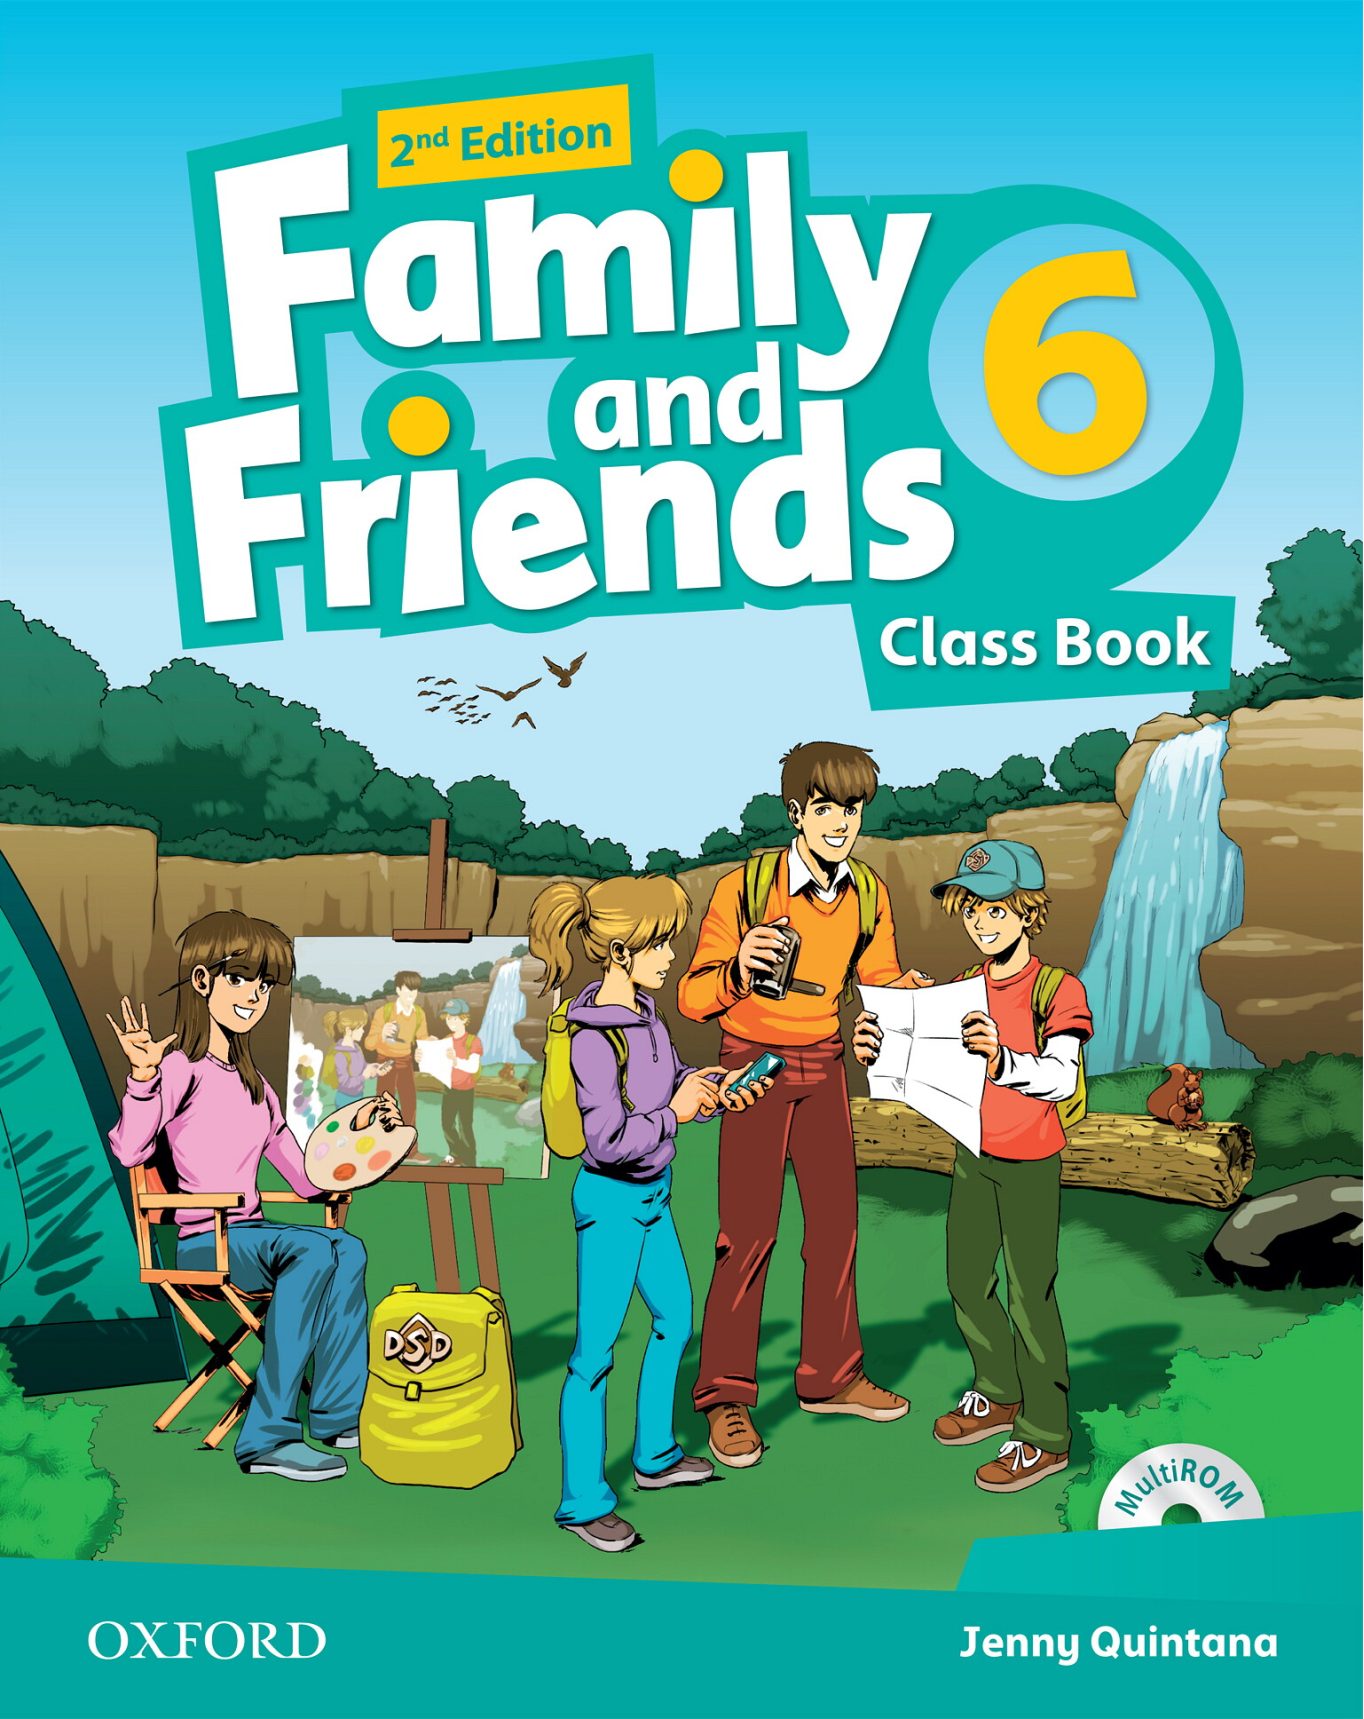 Rich Results on Google's SERP when searching for 'Family And Friends Class Book 6'